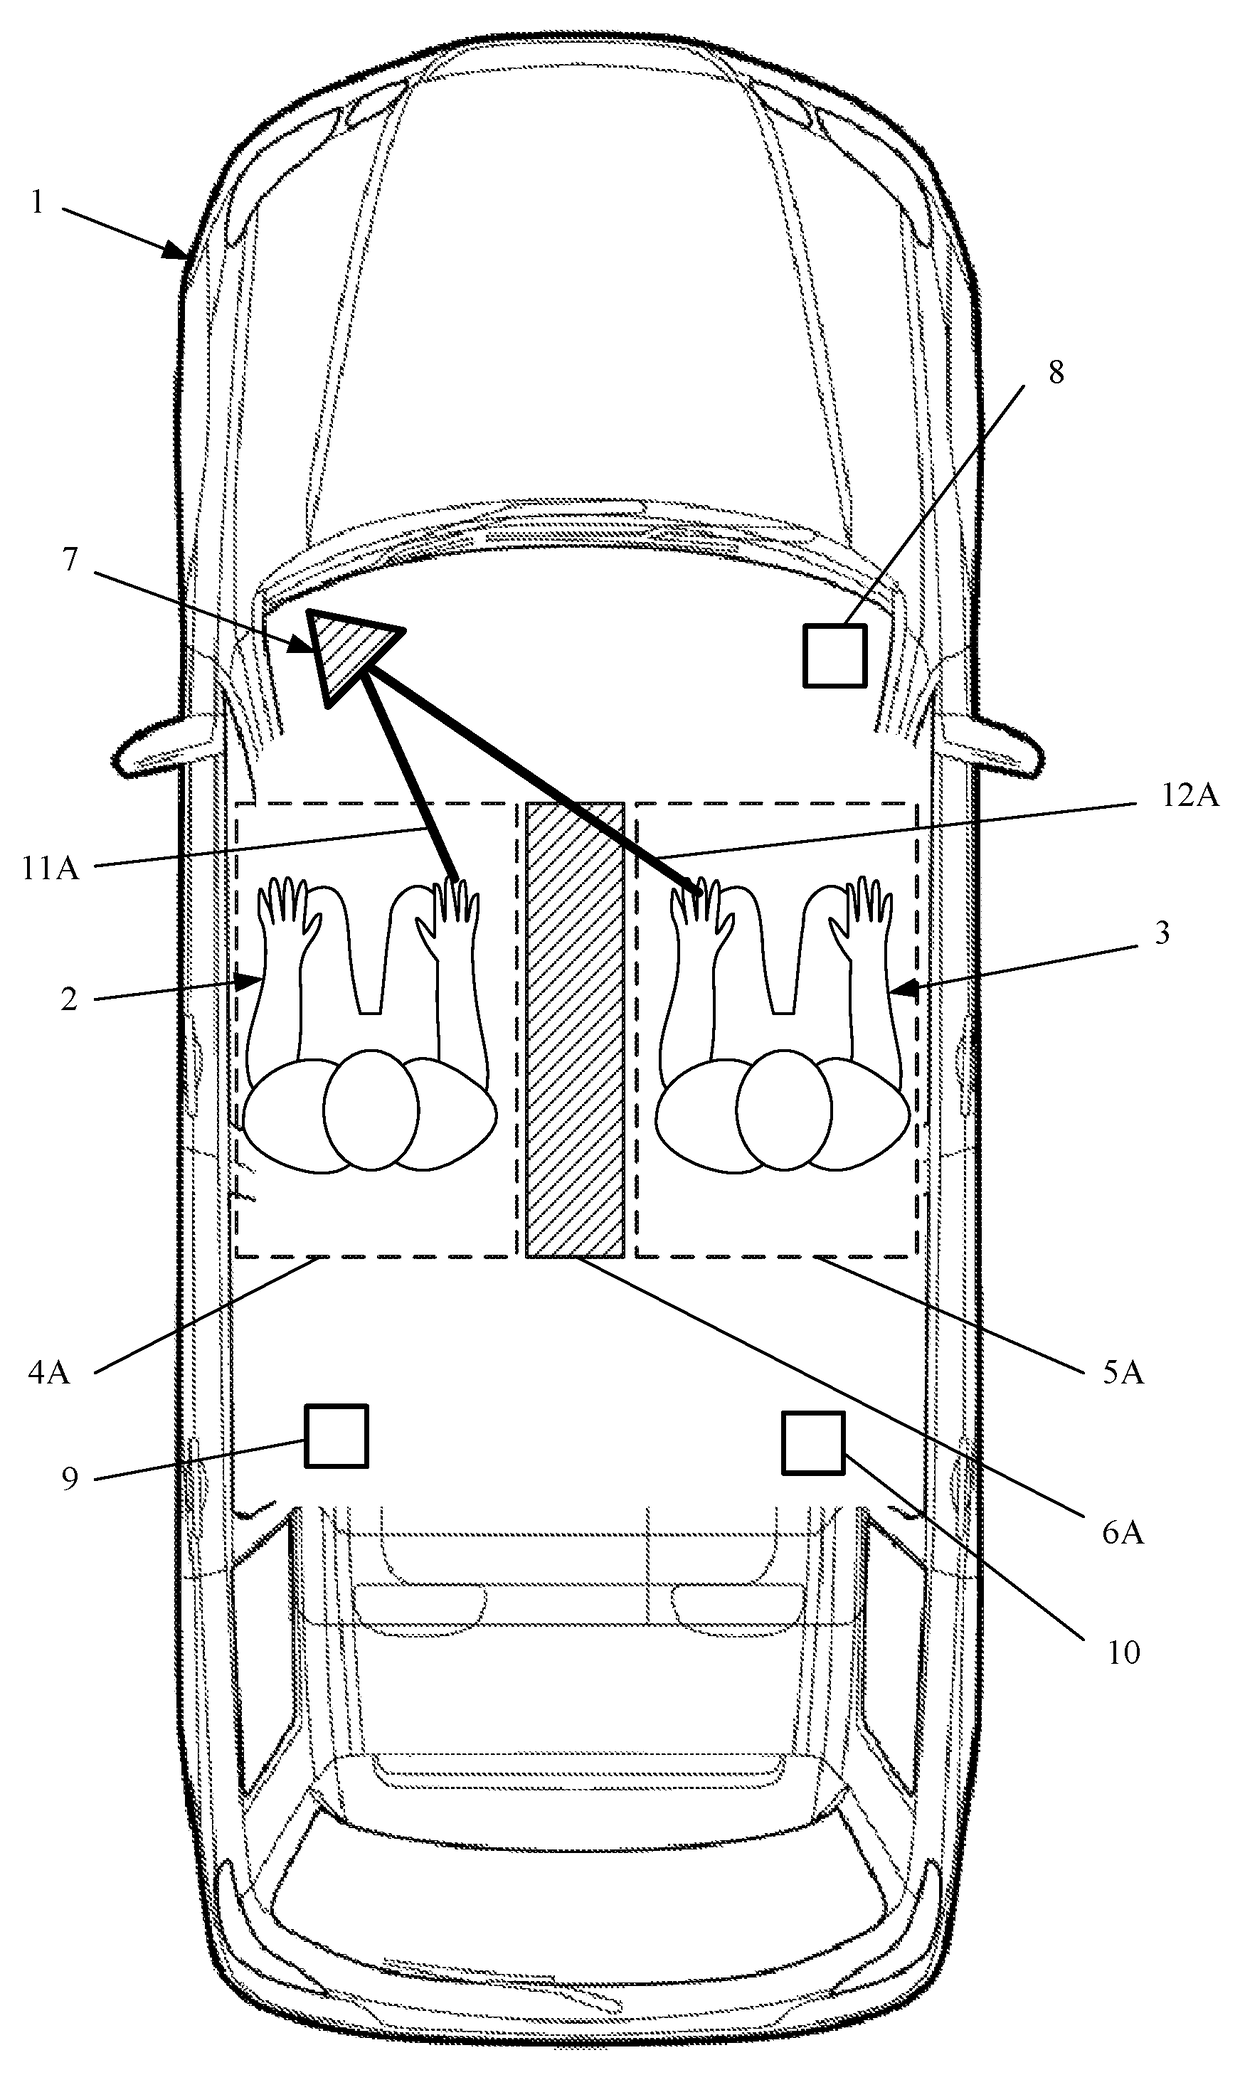 Methods and systems for identifying the user of a smartphone inside a moving vehicle and automatic detection and calculation of the time and location when and where a vehicle has been parked